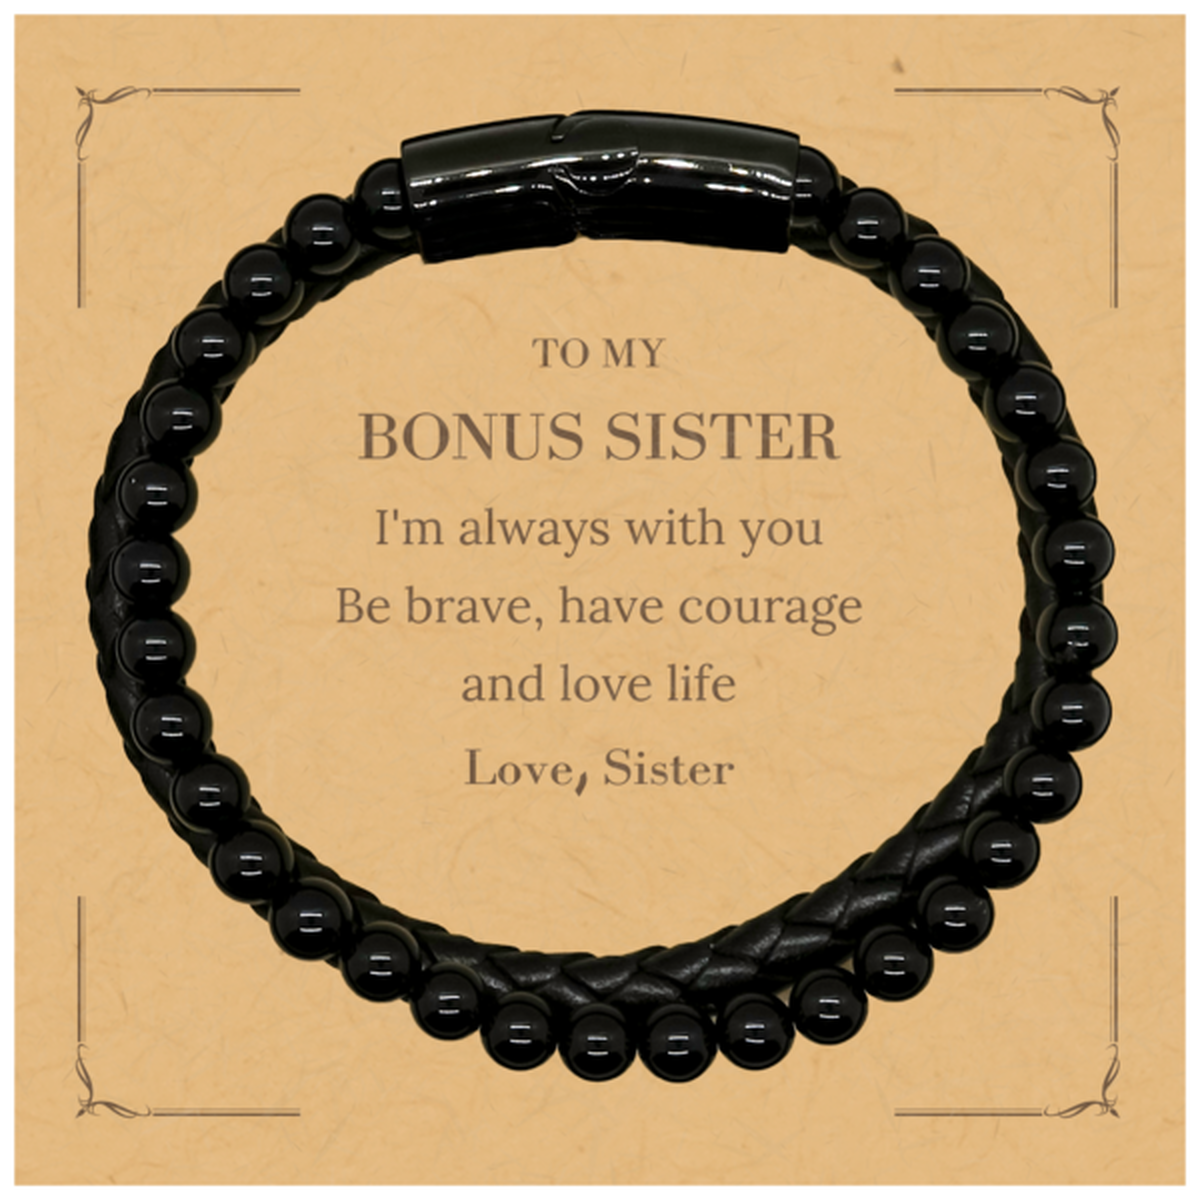 To My Bonus Sister Gifts from Sister, Unique Stone Leather Bracelets Inspirational Christmas Birthday Graduation Gifts for Bonus Sister I'm always with you. Be brave, have courage and love life. Love, Sister